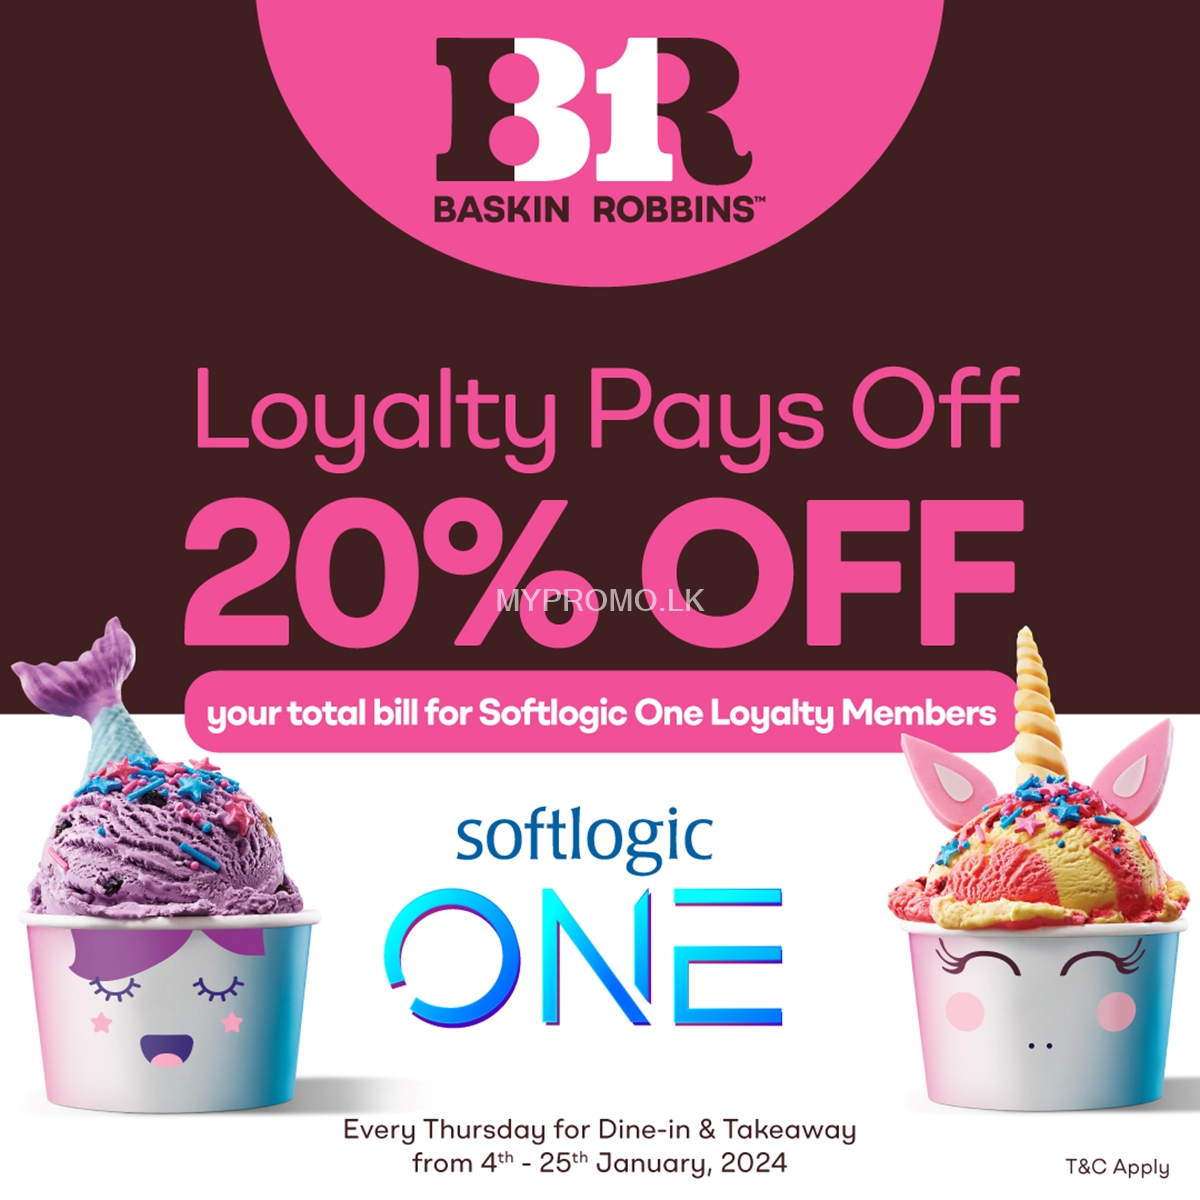 Exclusive Offer for Softlogic loyalty customers on Thursdays at Baskin Robbins